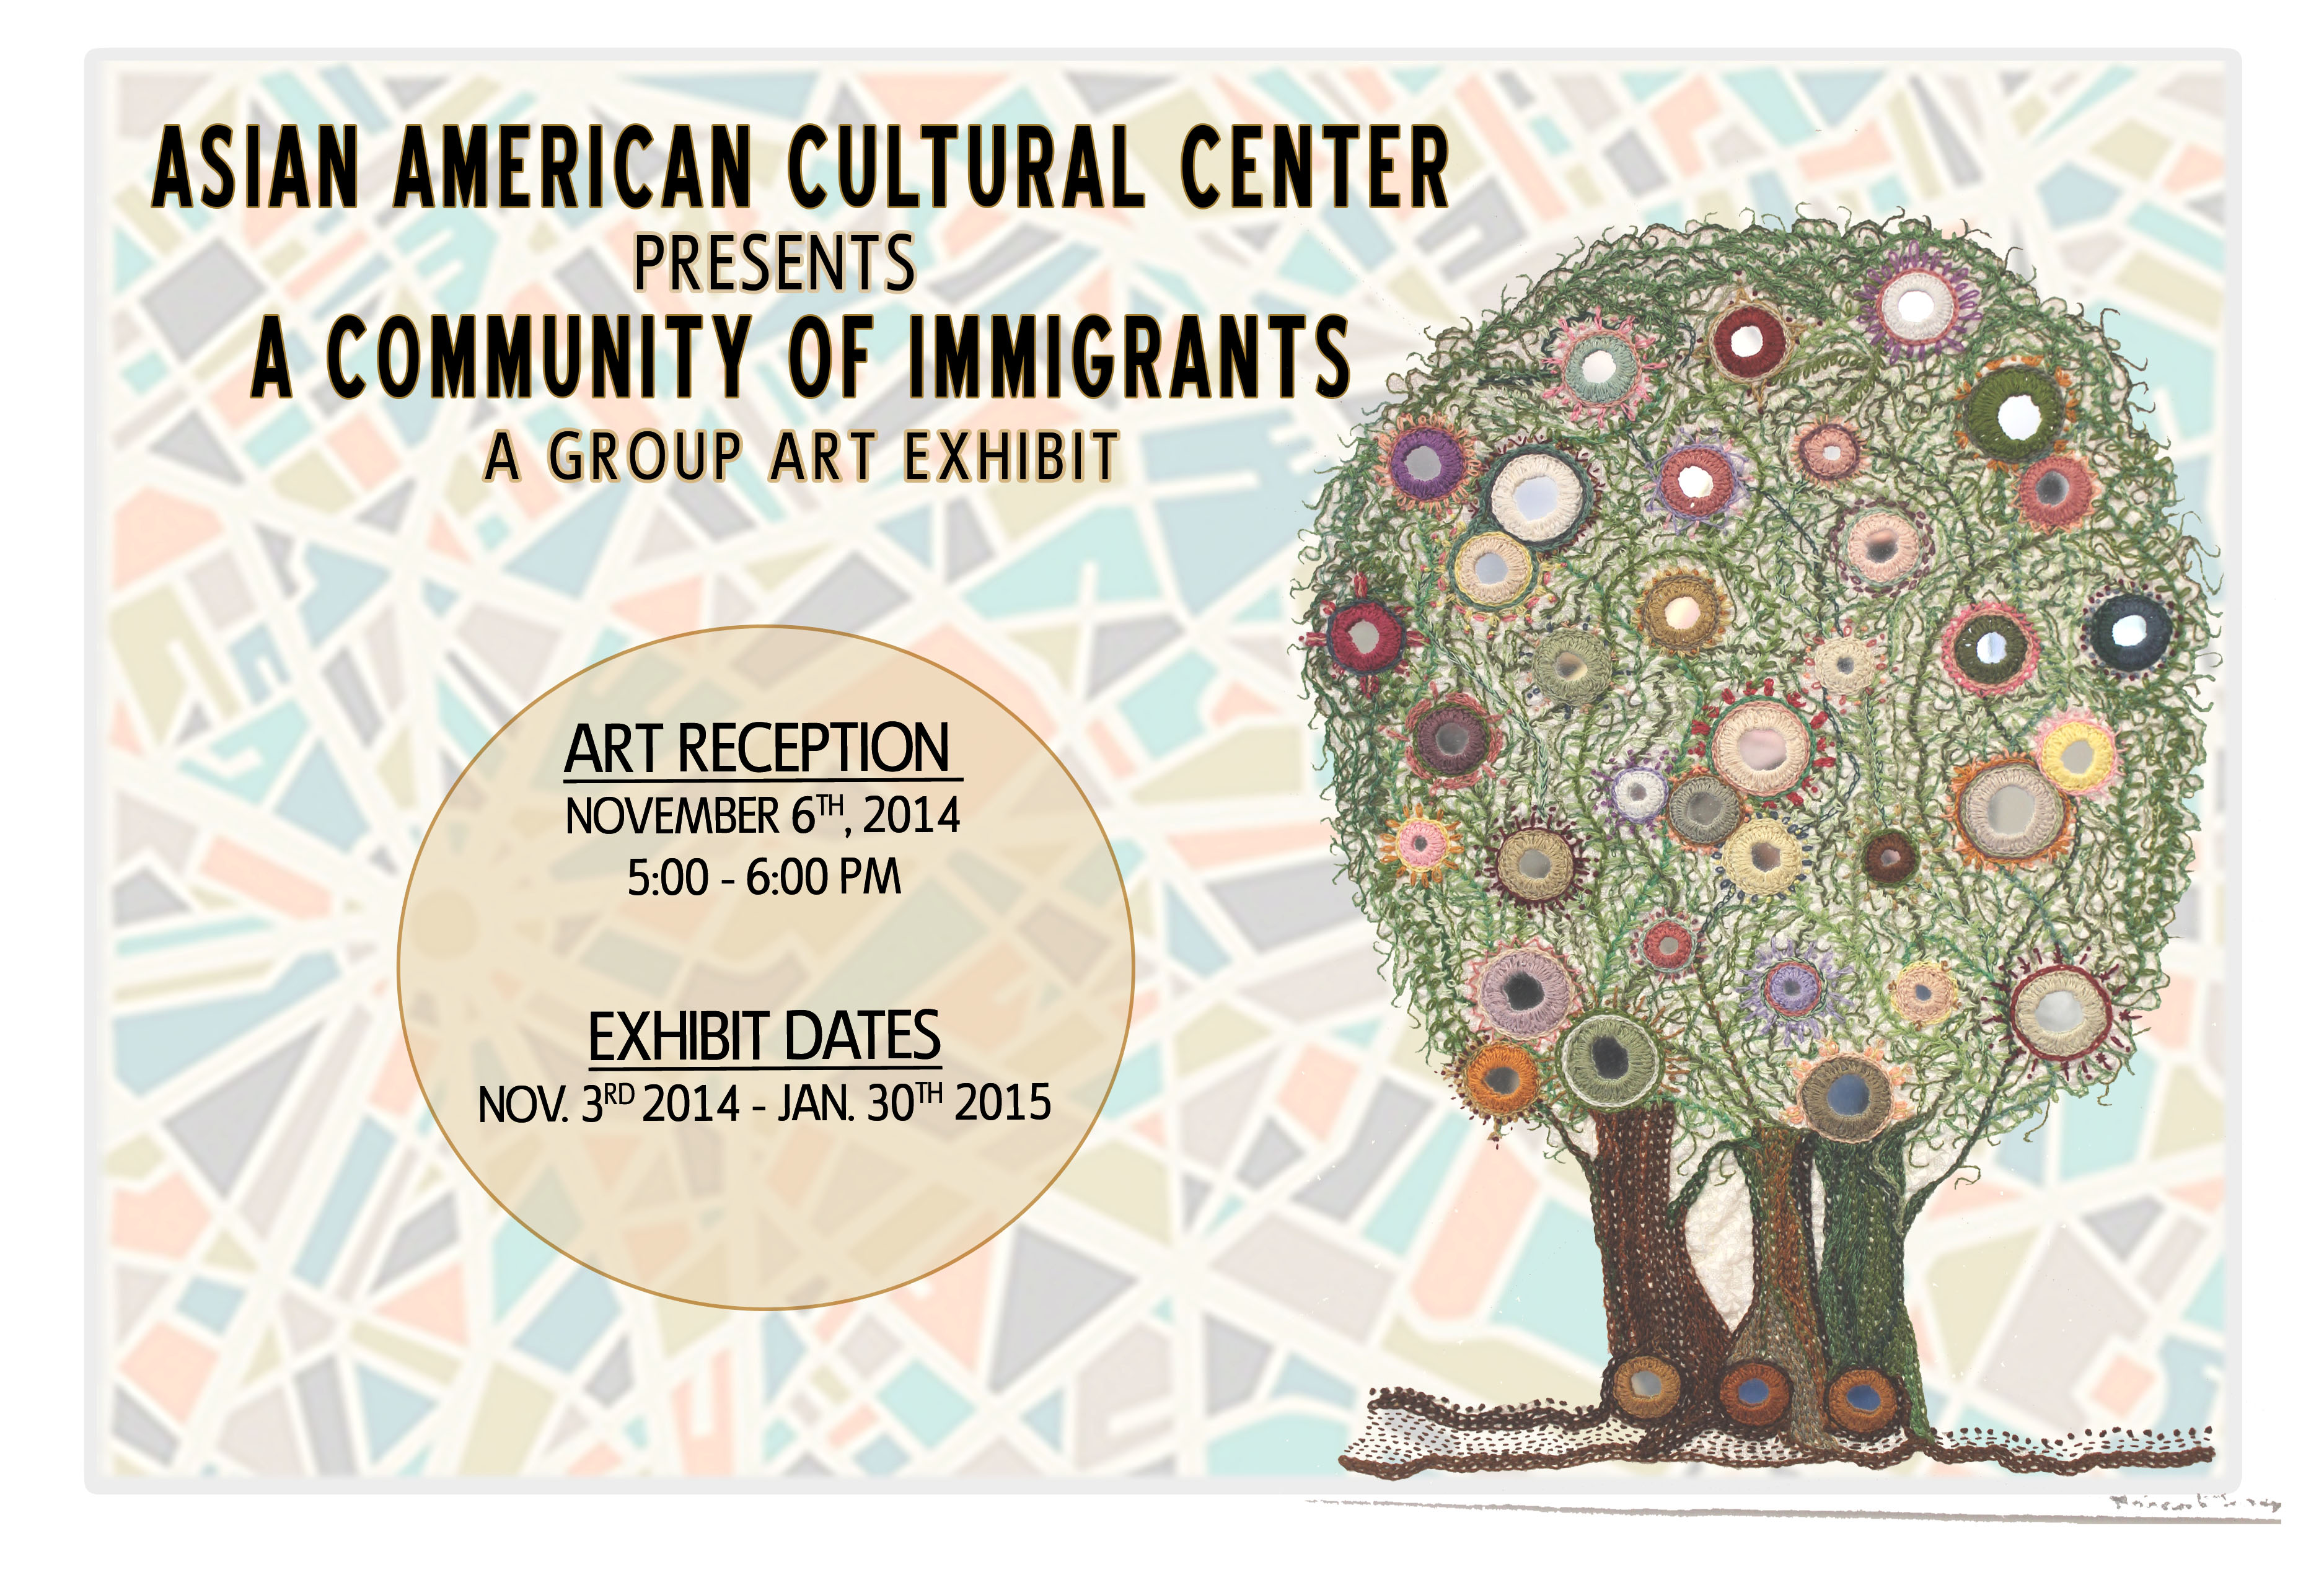 A Community of Immigrants poster featuring colorful sharp angled shapes in background and an ornate tree illustration